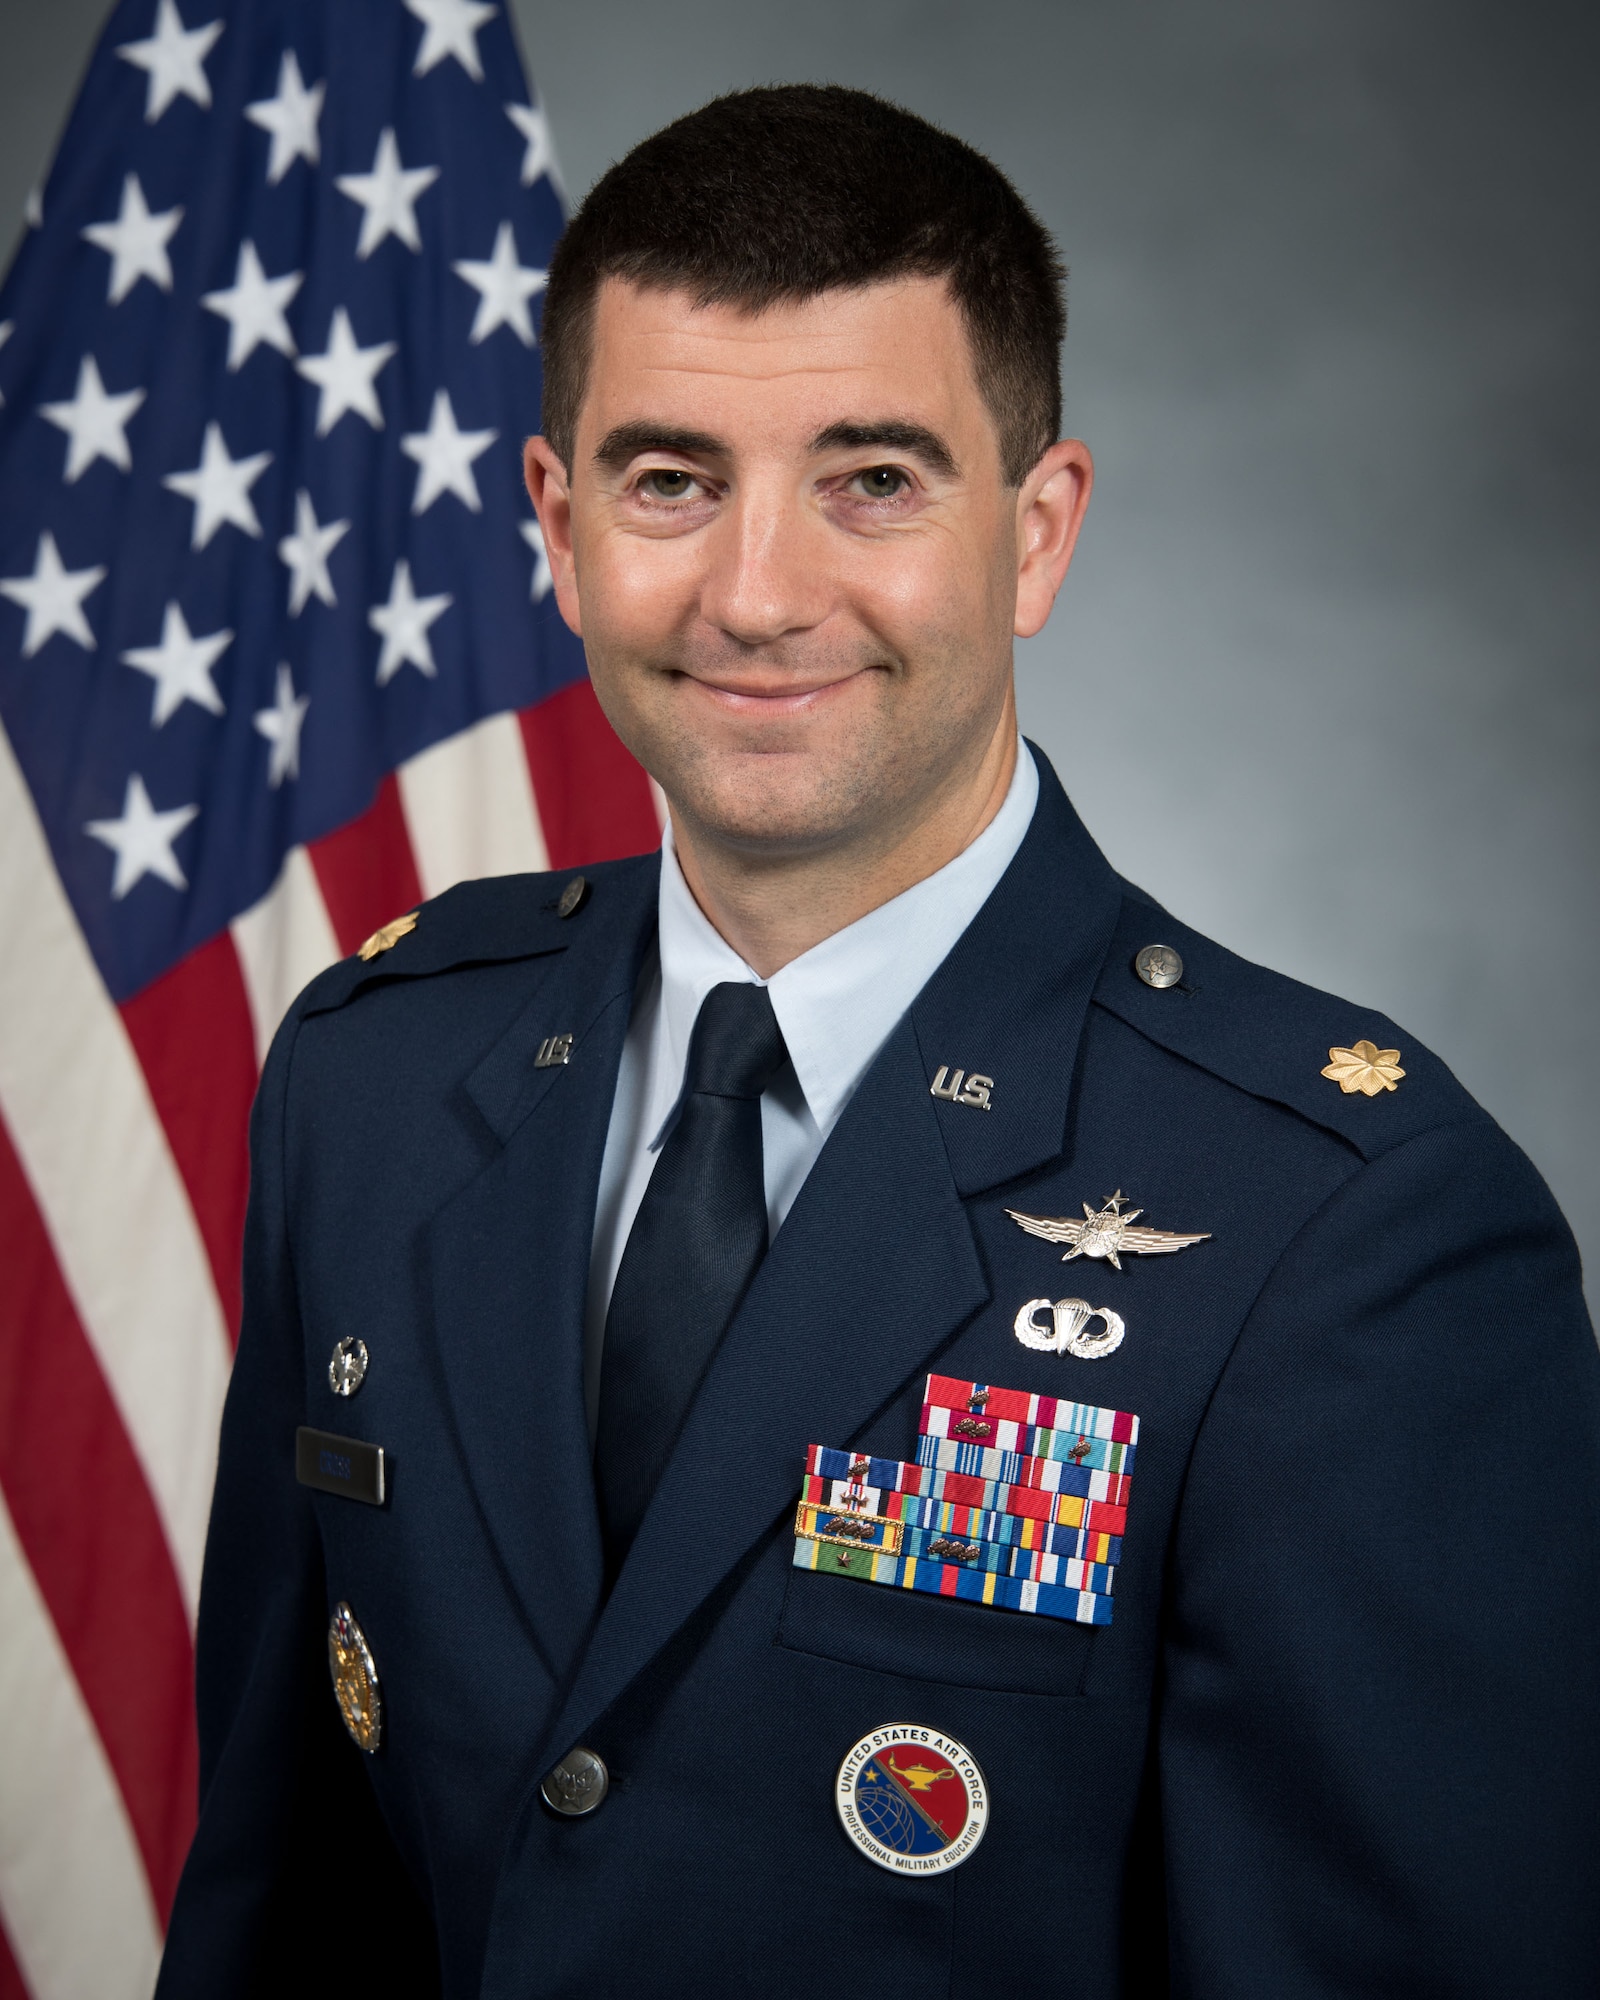 U.S. Air Force Maj. Adam Cross, 422nd Communications Squadron commander, poses for an official photo. (Courtesy photo)